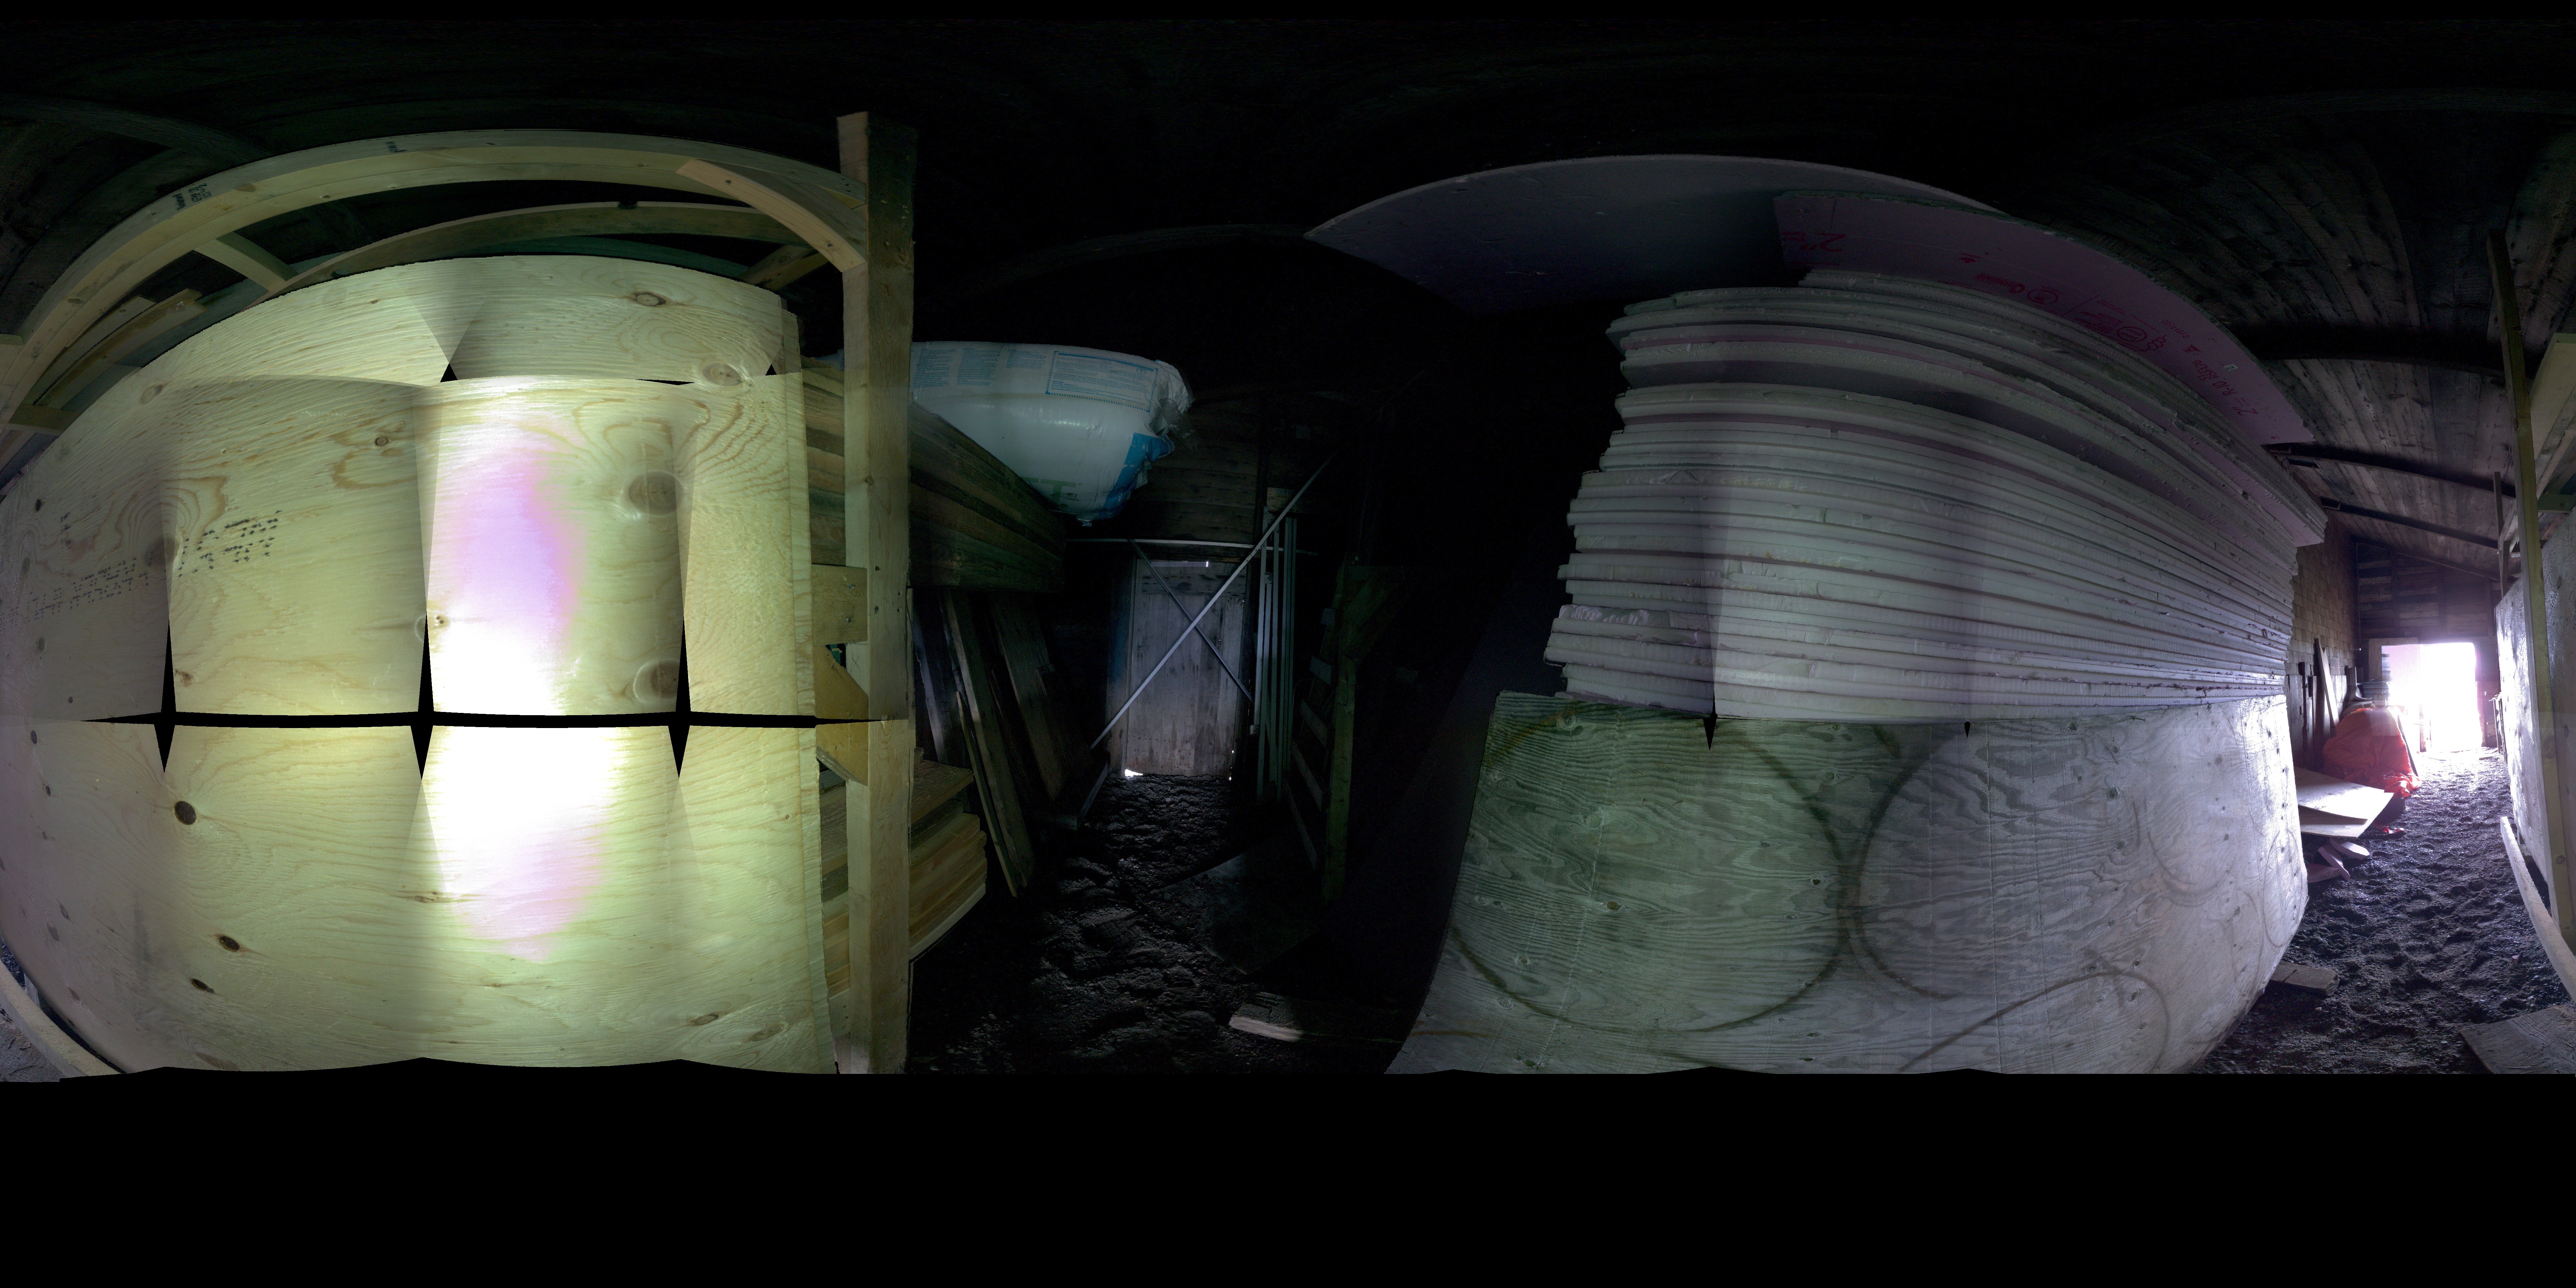 Panoramic view of the Pacific Steam Whaling Co. Bonehouse interior from the Leica BKL 360, scanning location 2